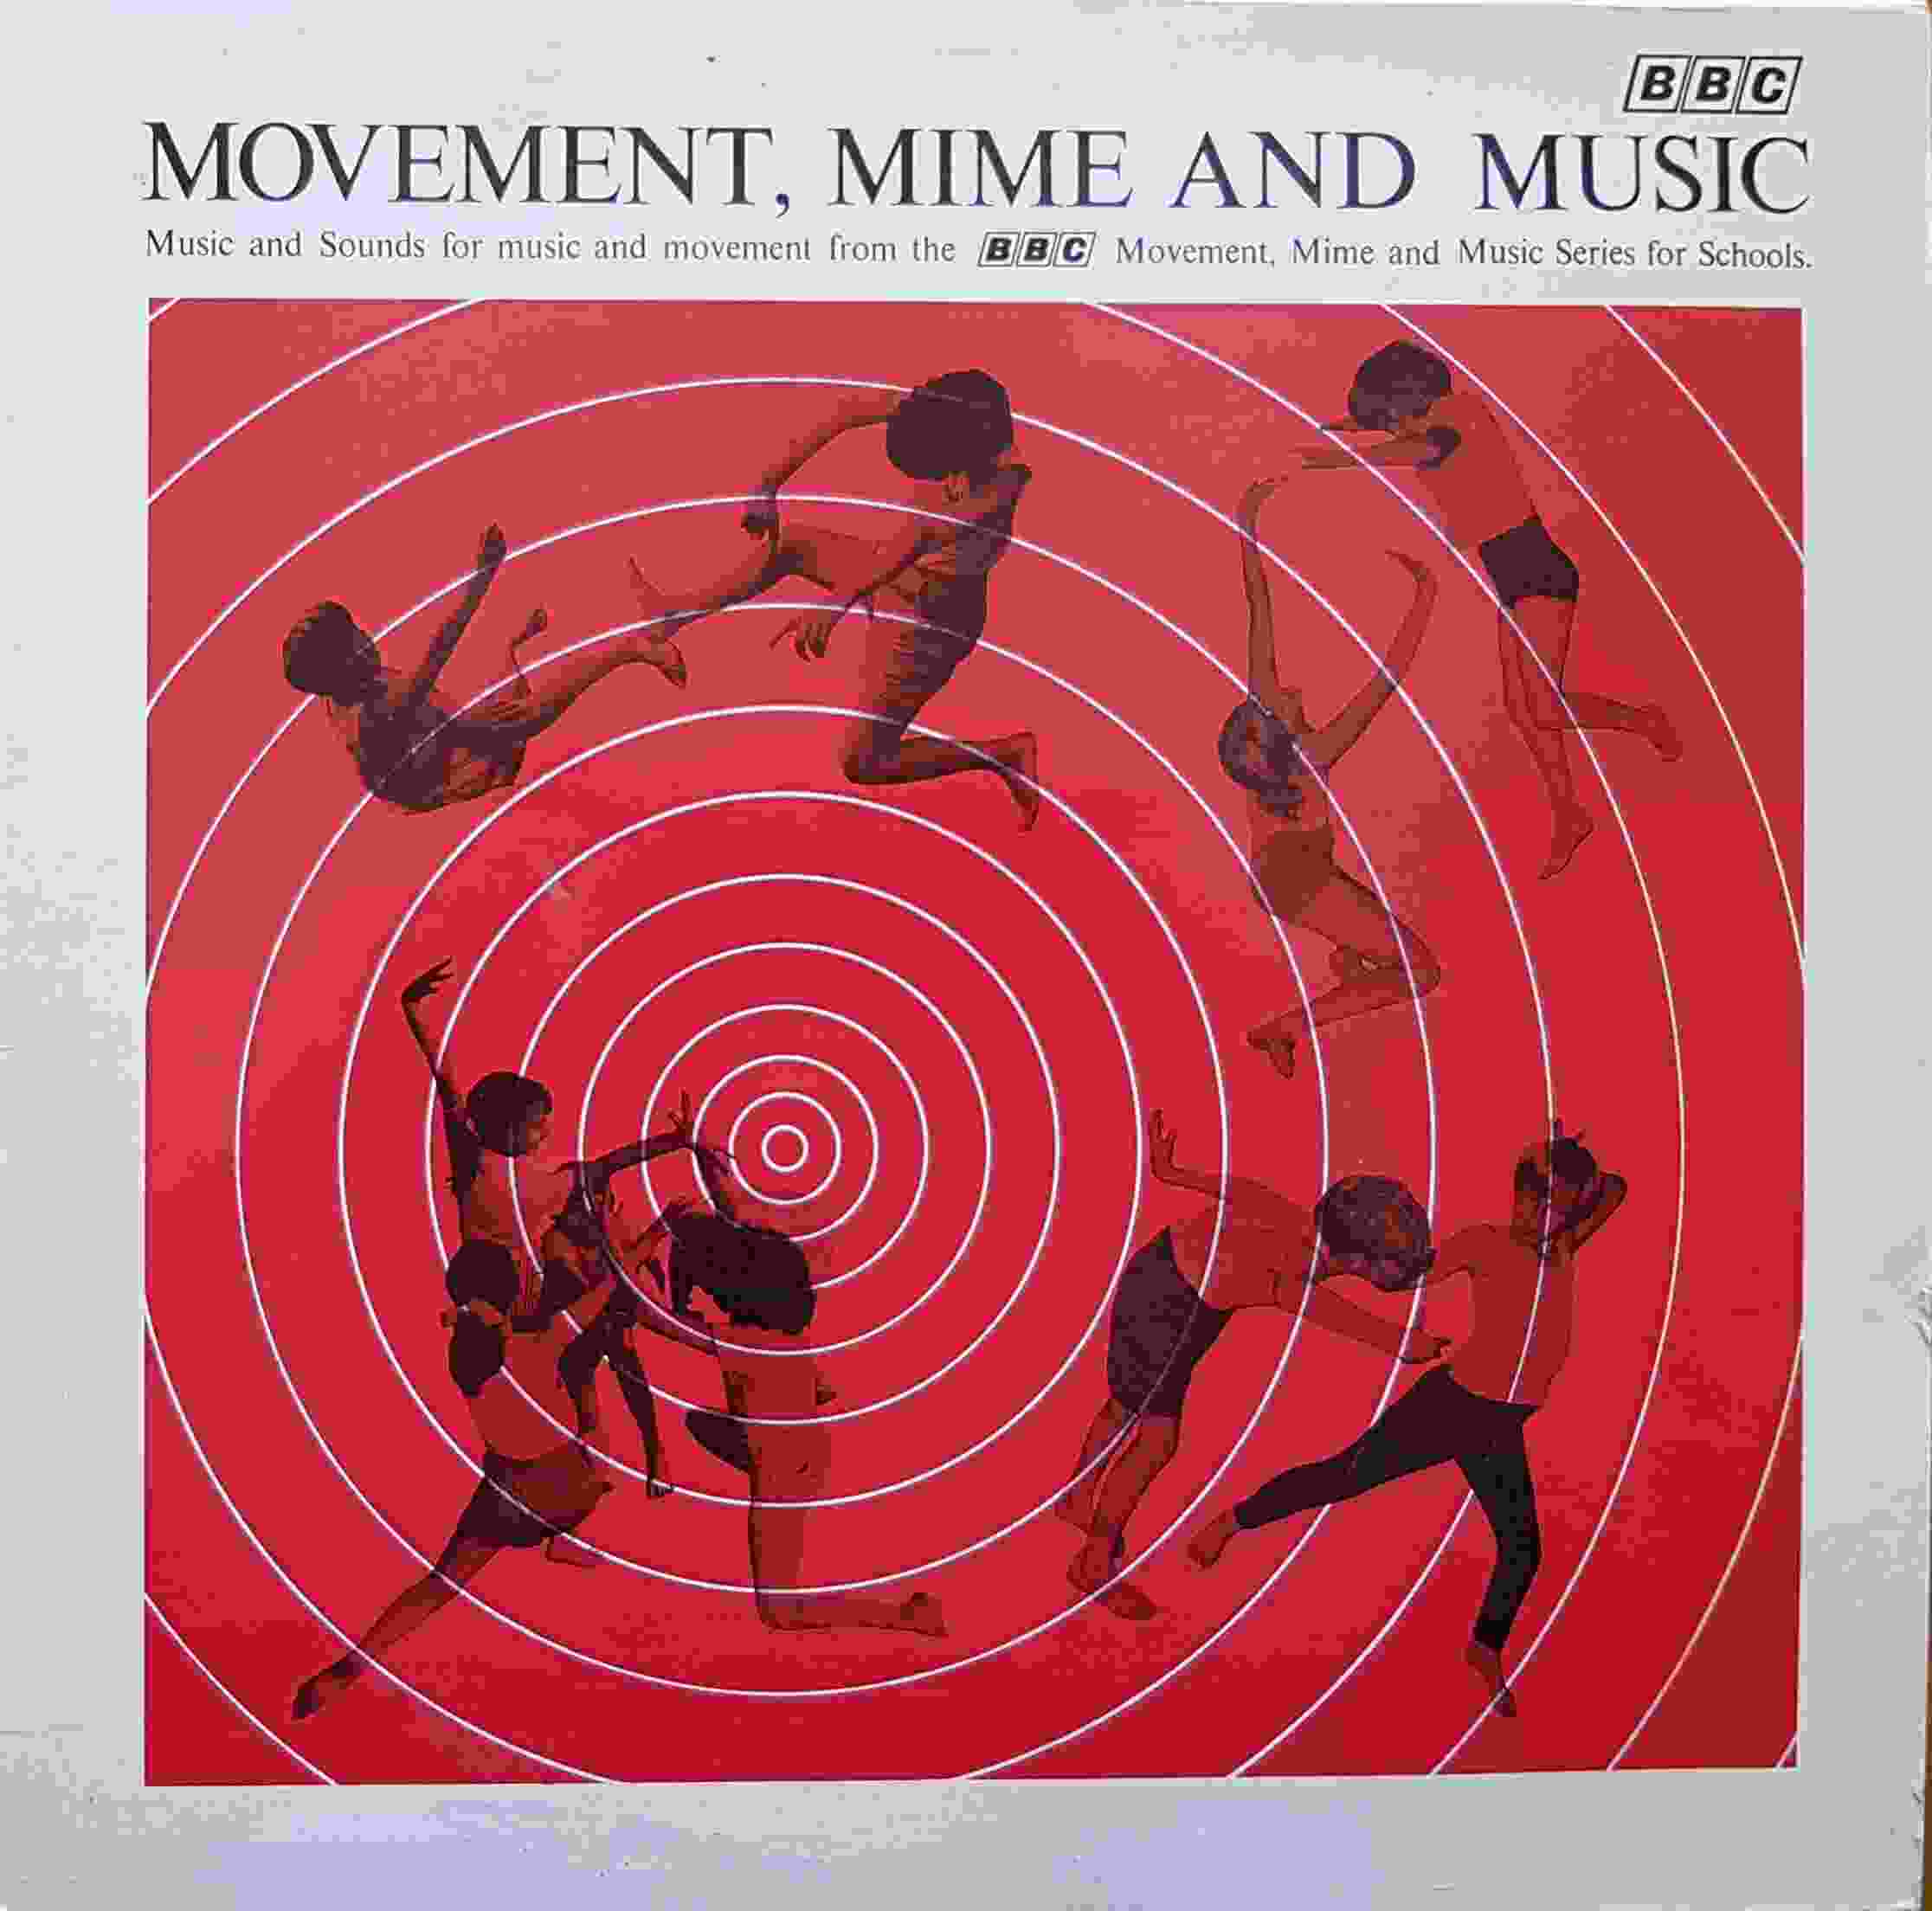 Picture of RESR 5 Movement, mime and music by artist Derbyshire / Baker from the BBC albums - Records and Tapes library